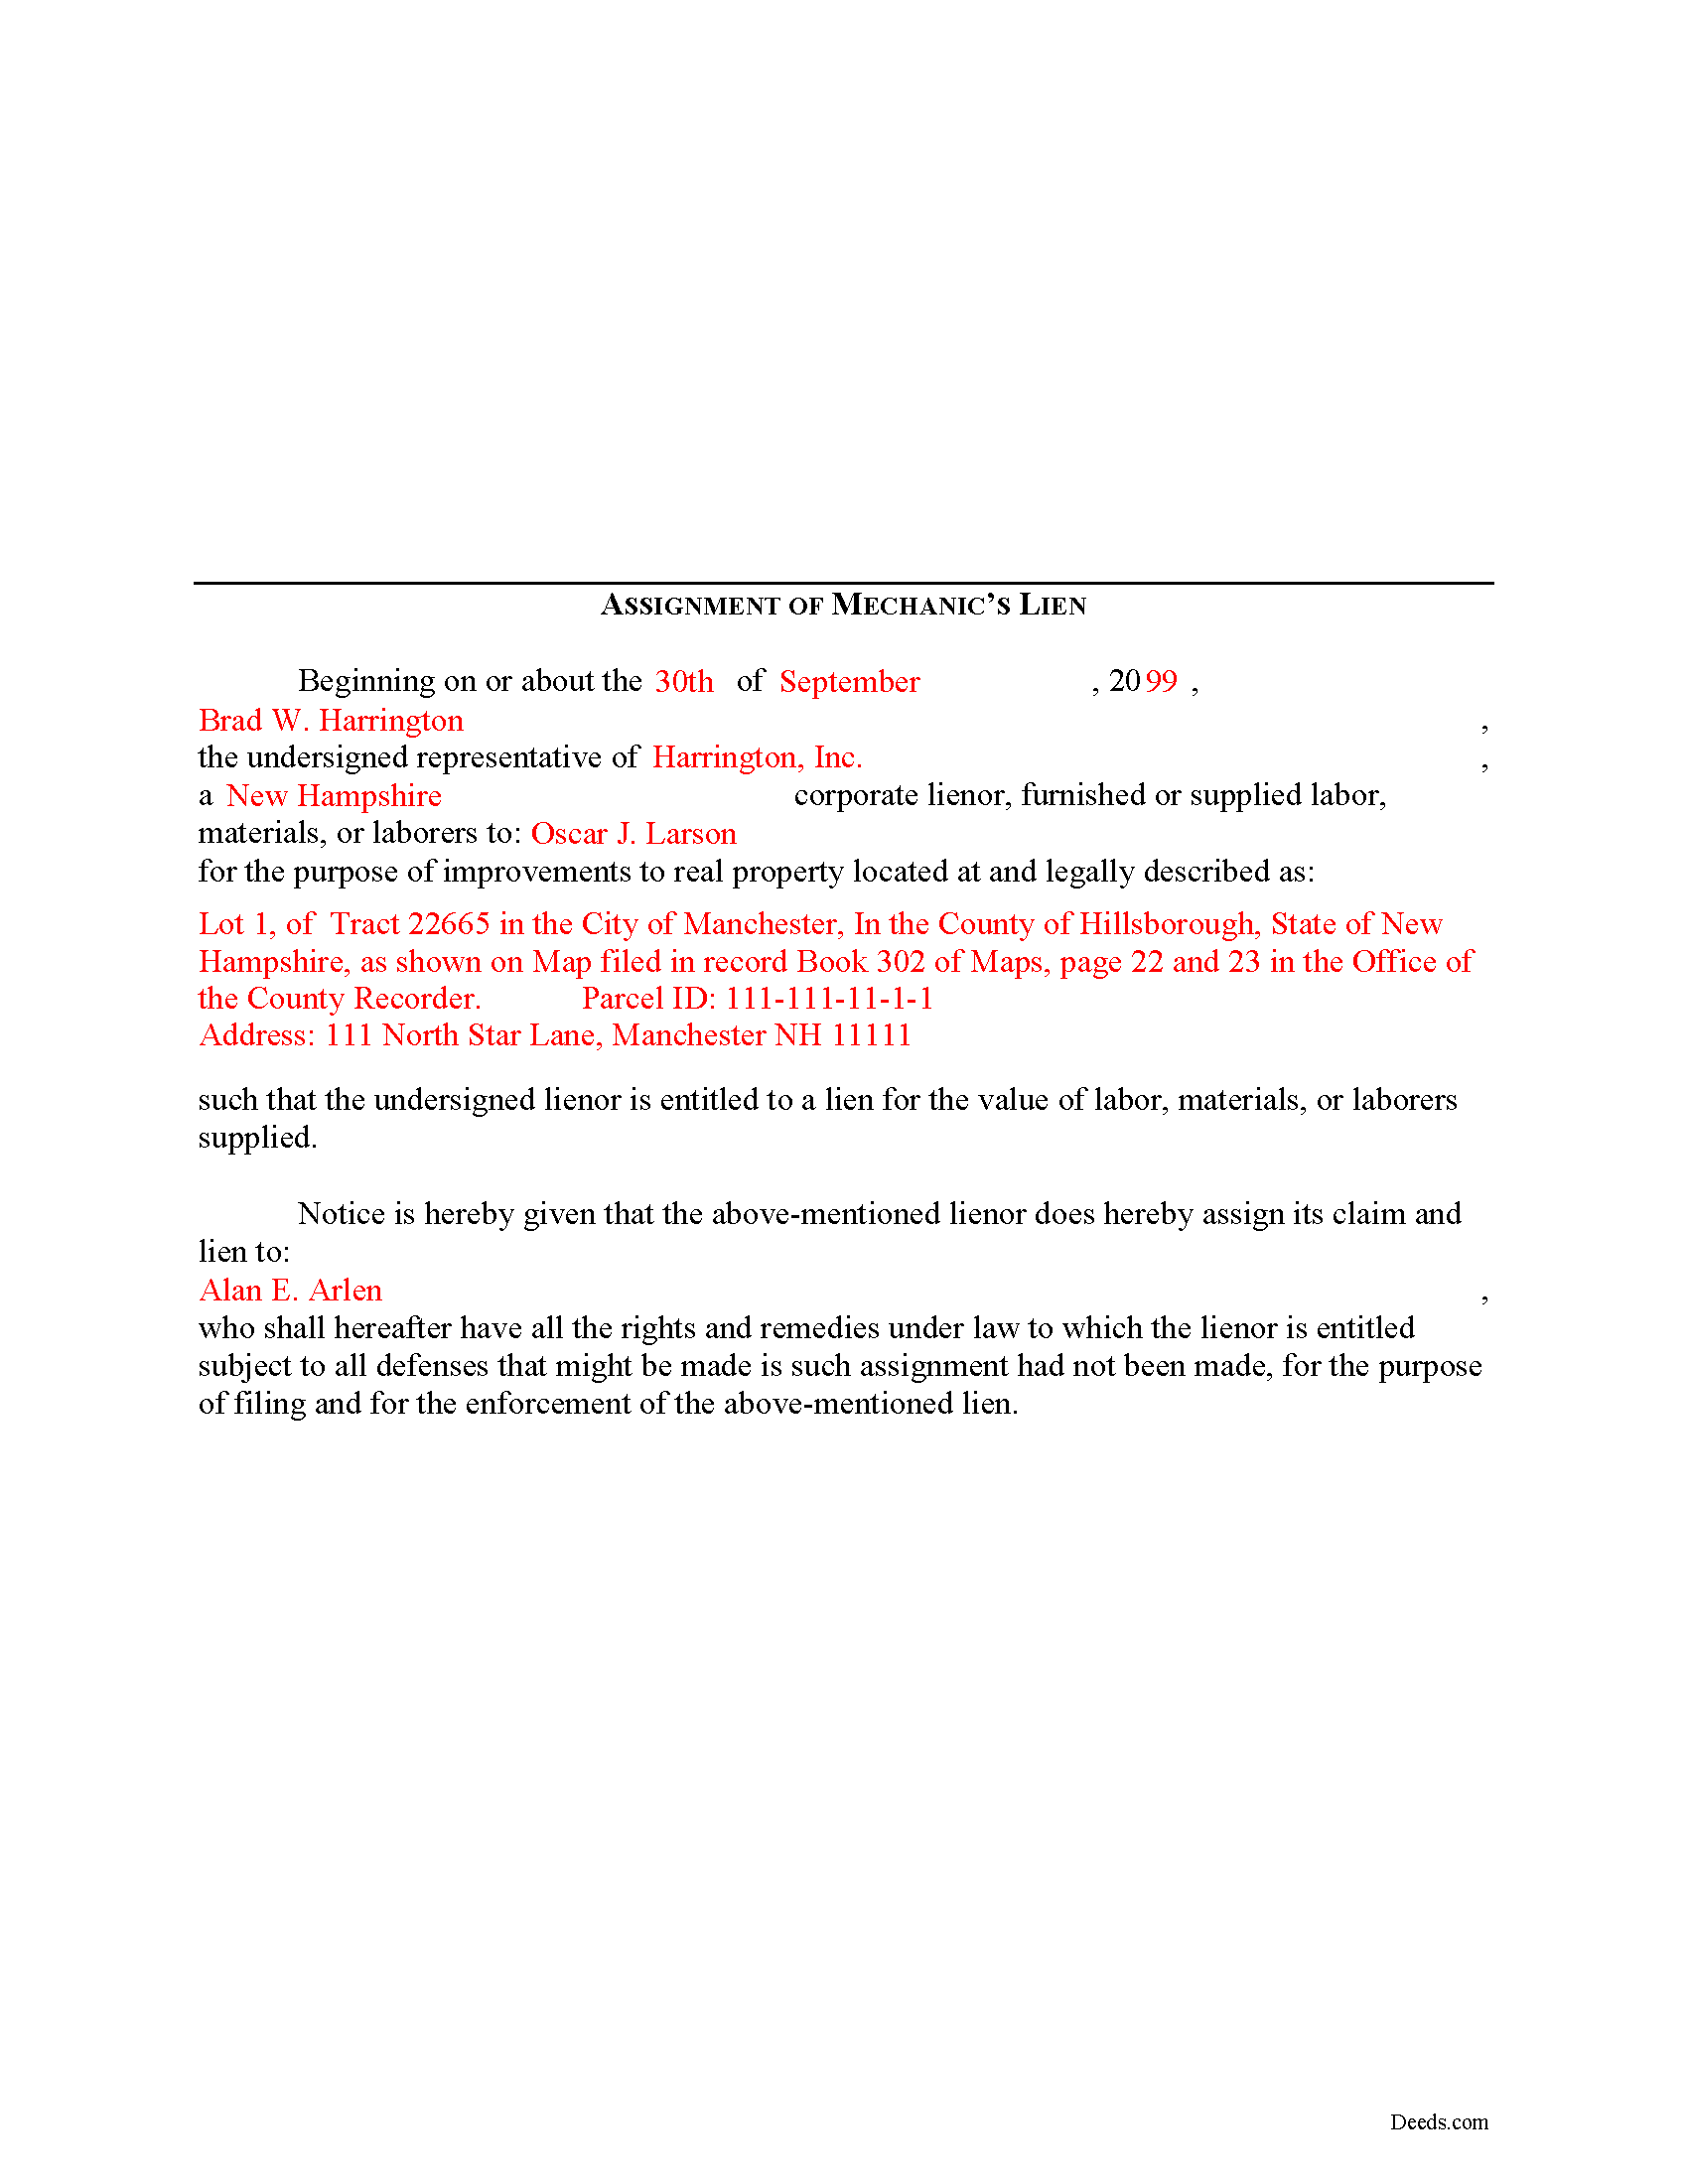 Completed Example of the Assignment of Mechanics Lien Document